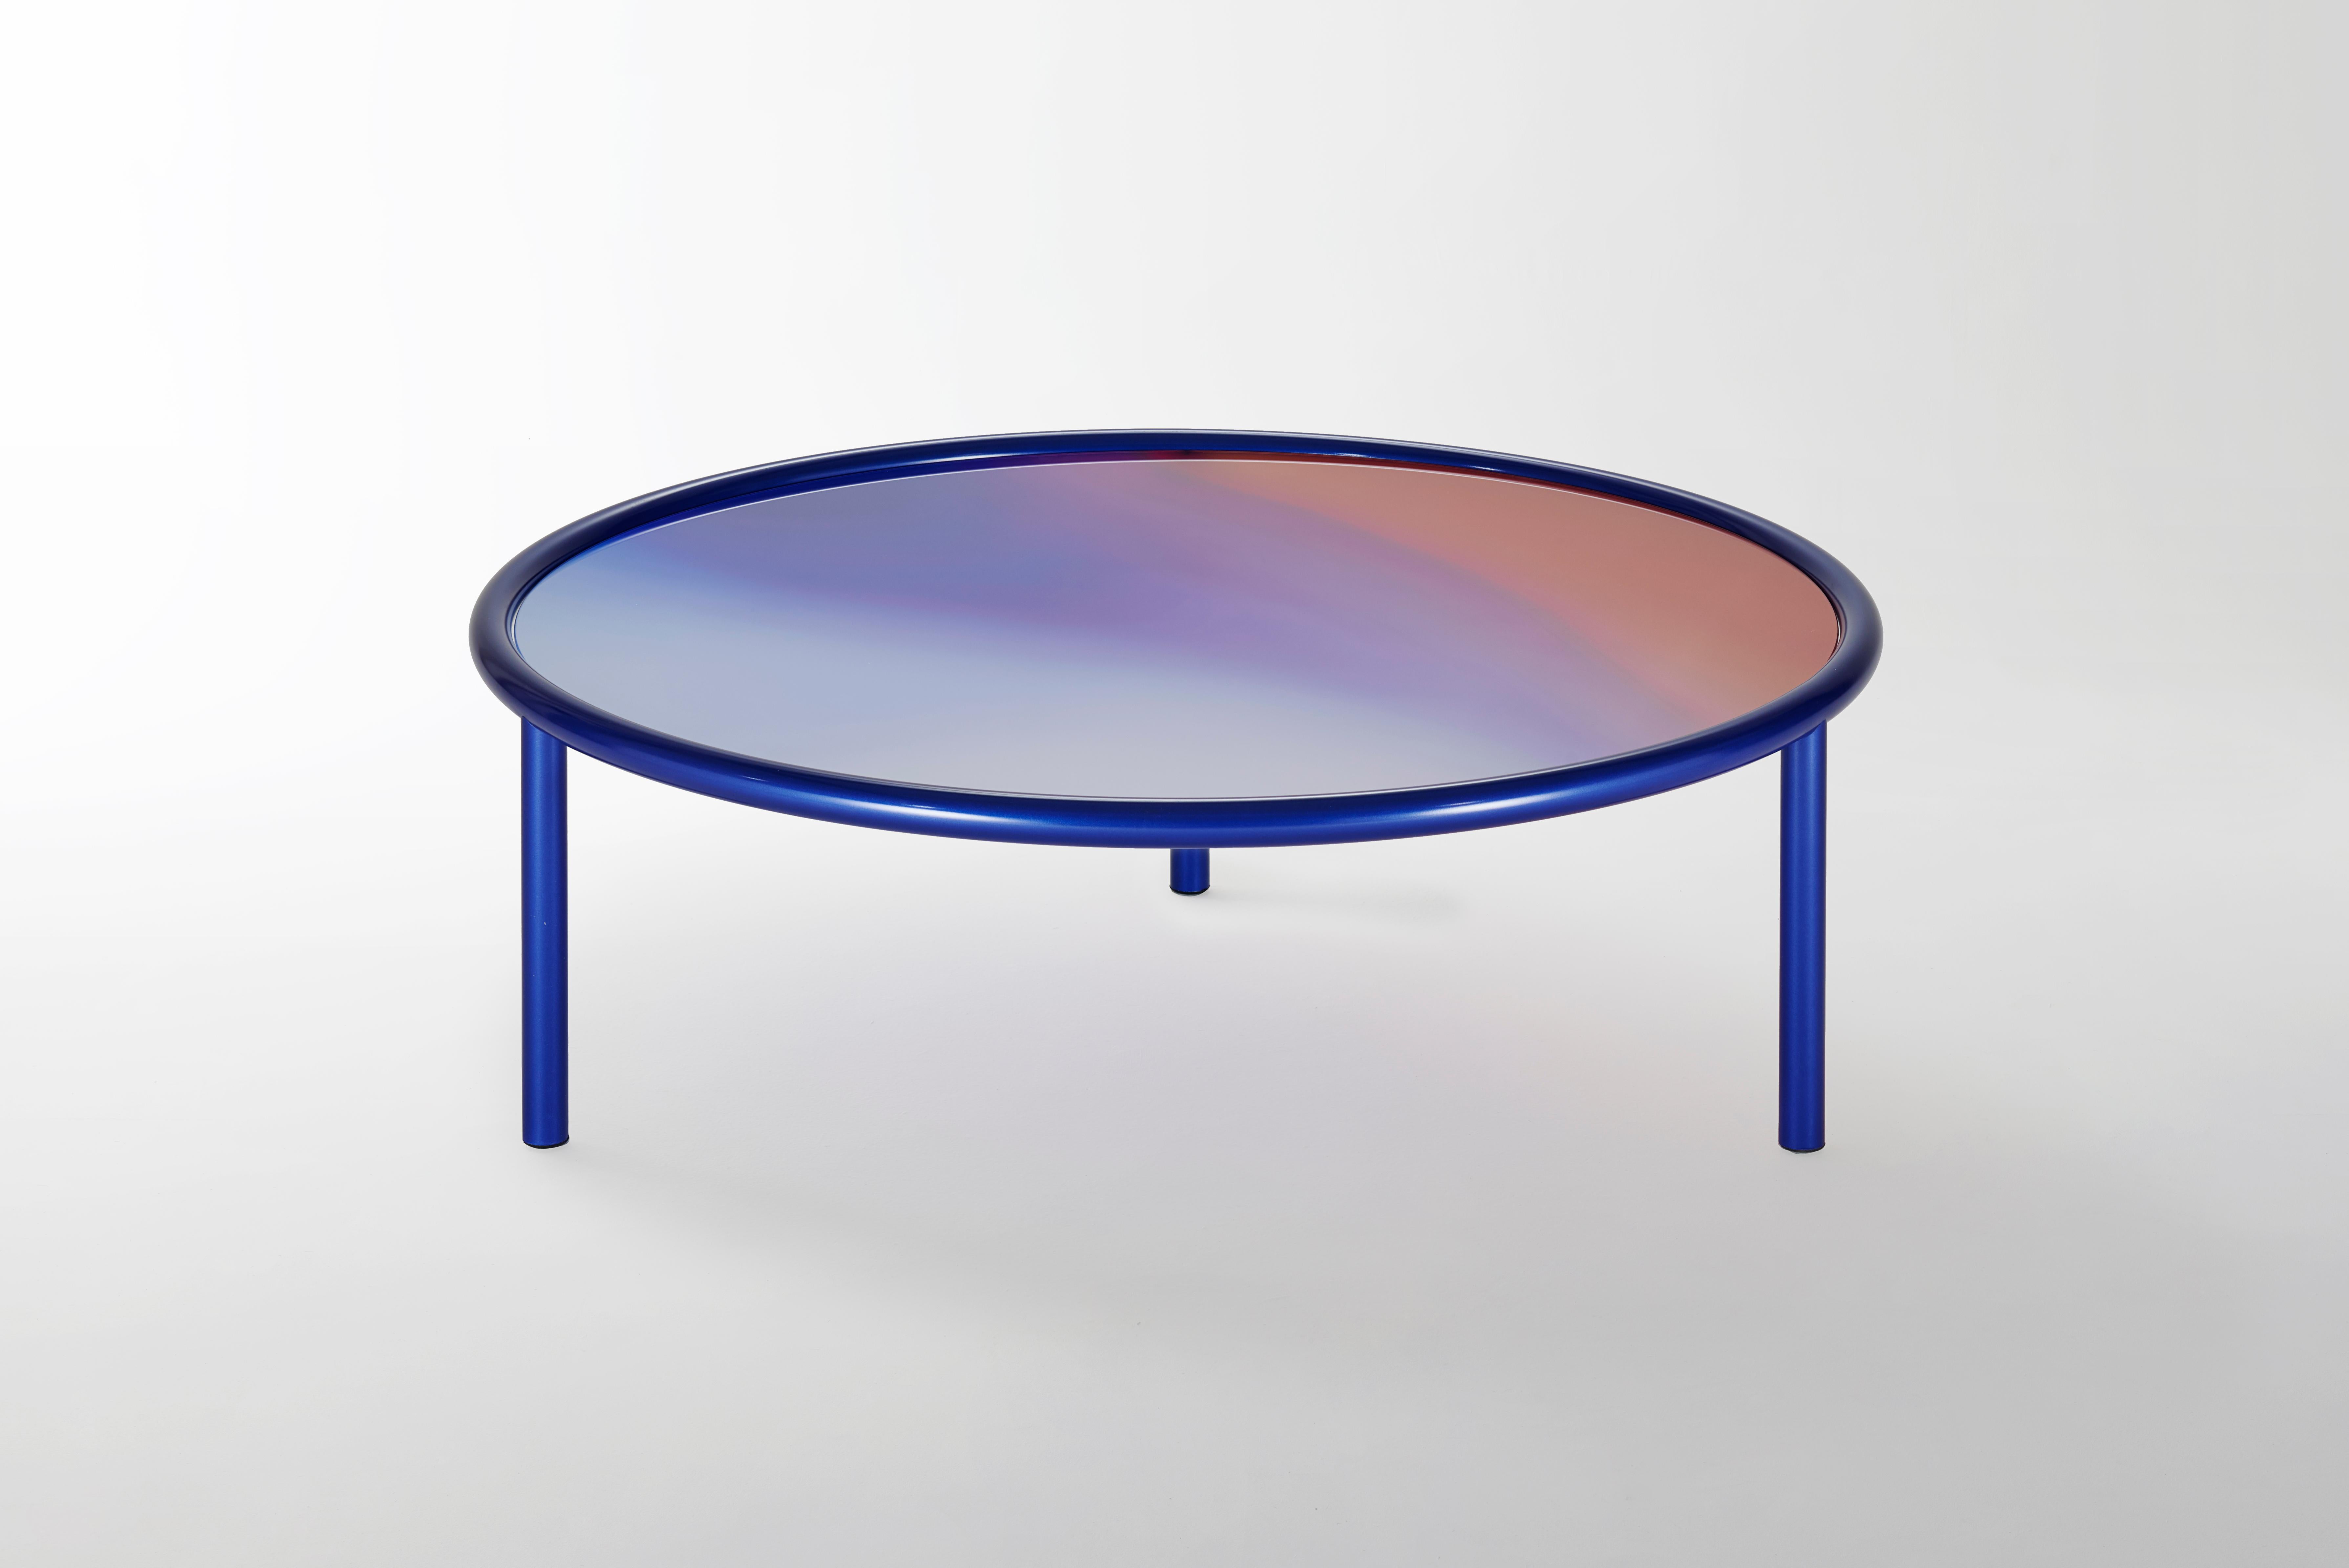 Italian L.A. SUNSET Midnight Blue Table, by Patricia Urquiola, Glas Italia IN STOCK For Sale